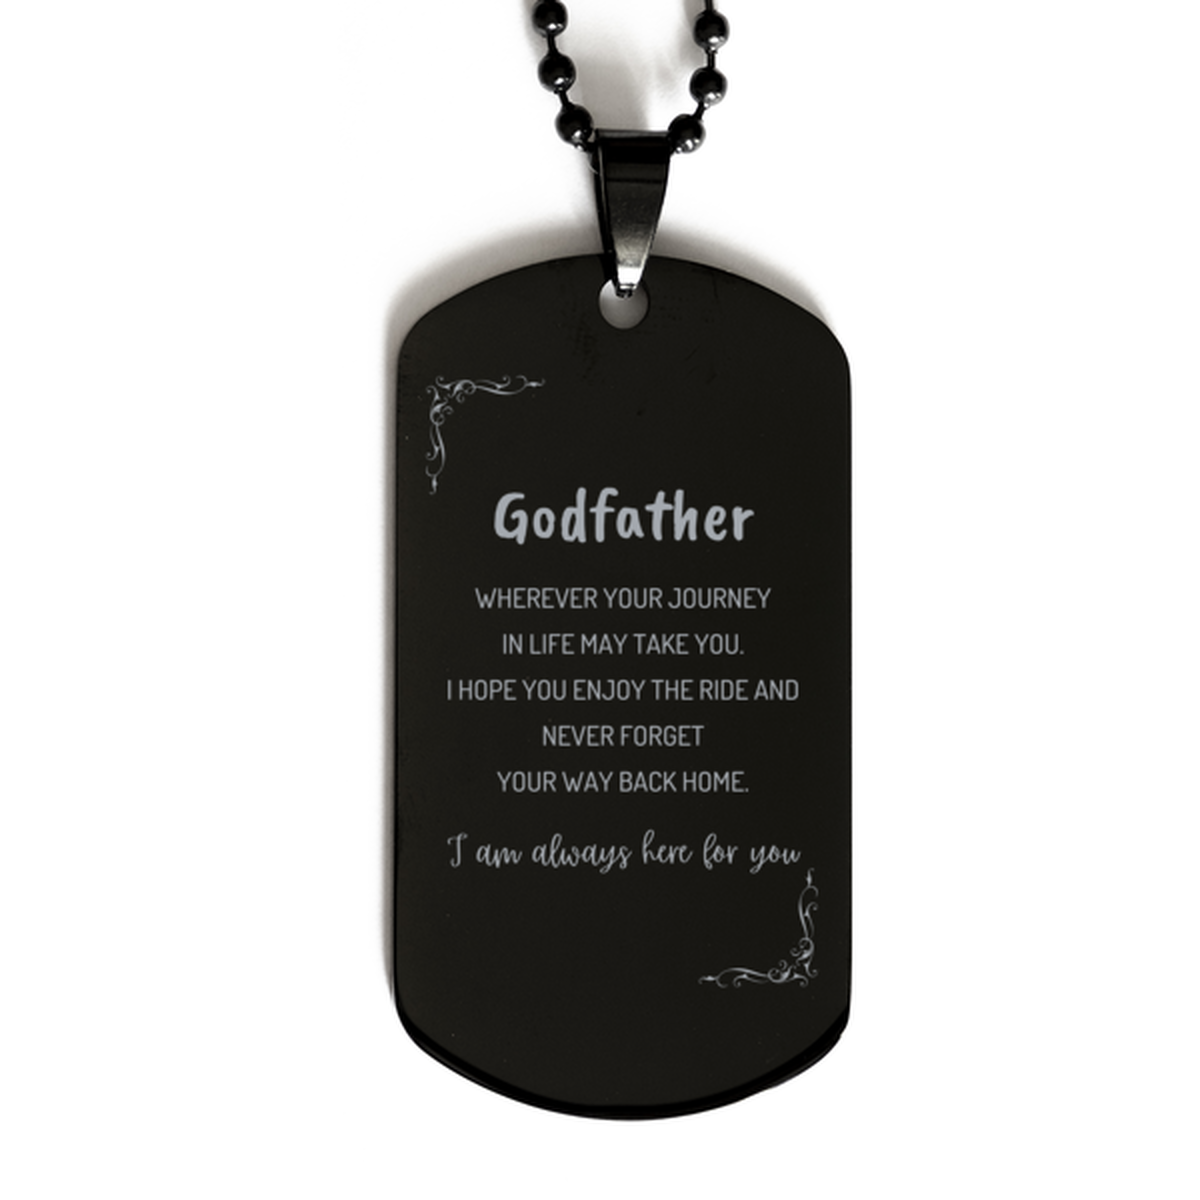 Godfather wherever your journey in life may take you, I am always here for you Godfather Black Dog Tag, Awesome Christmas Gifts For Godfather, Godfather Birthday Gifts for Men Women Family Loved One